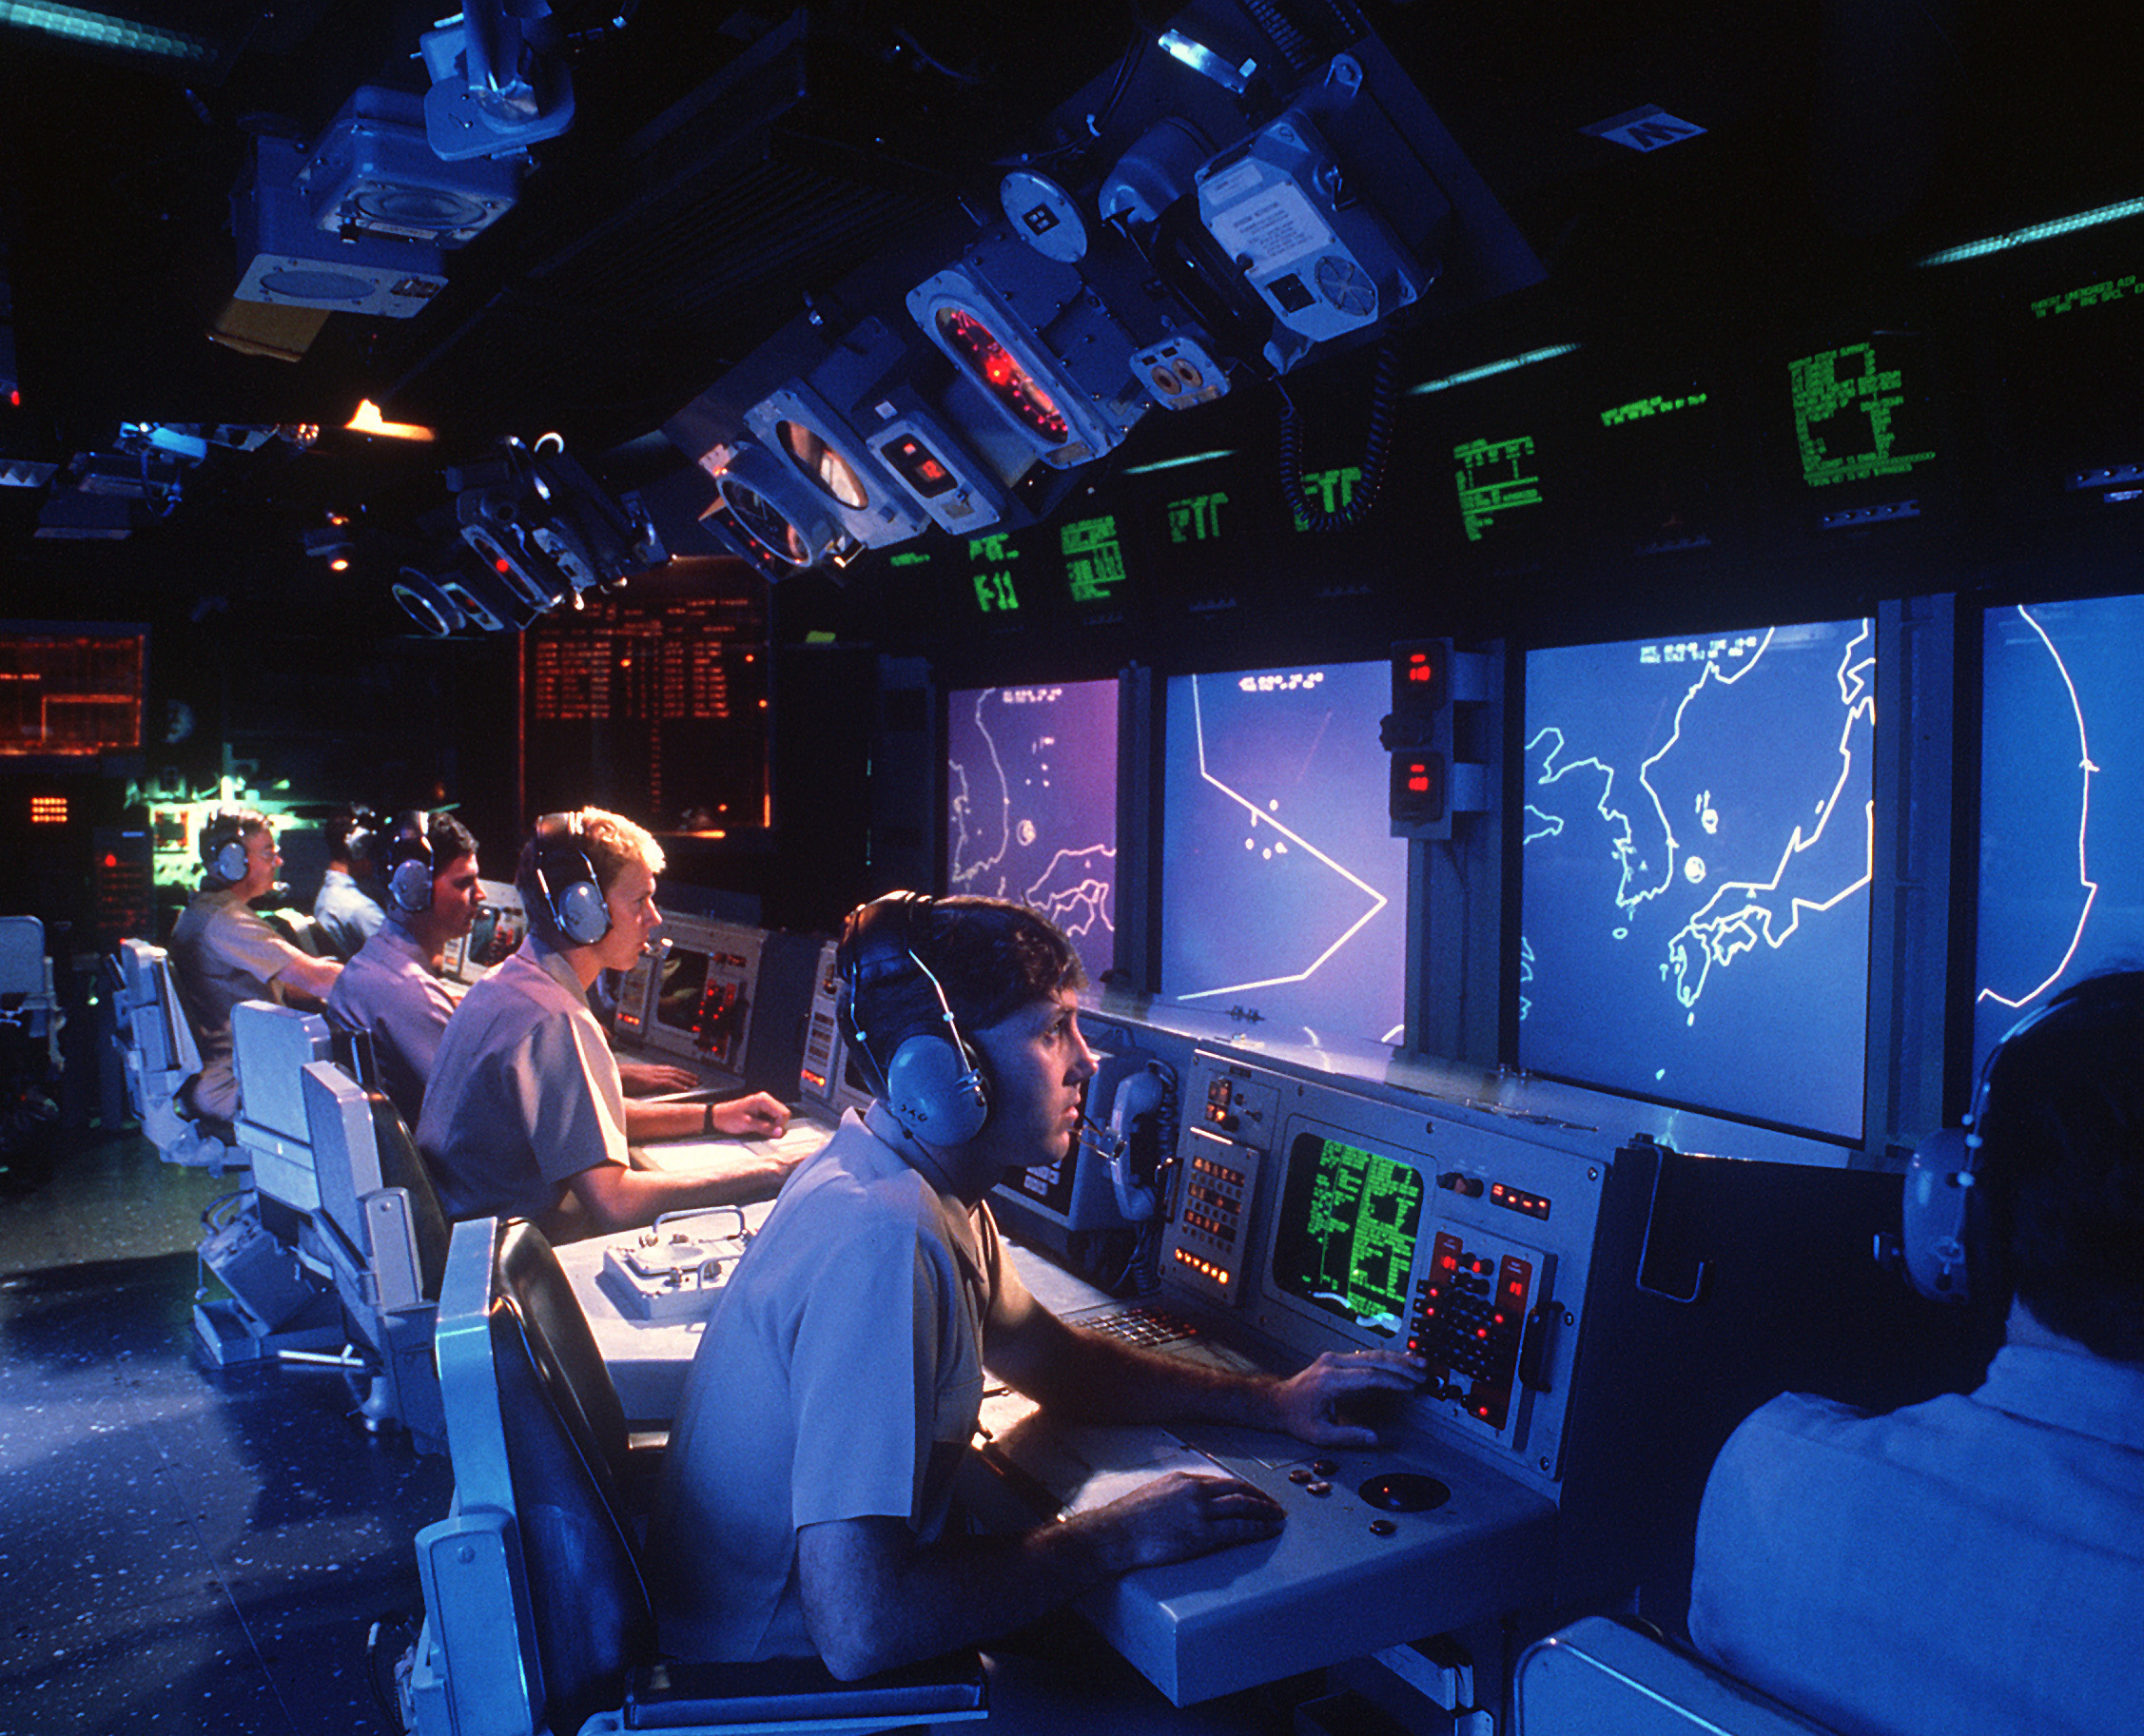 USS-Vincennes-showing-some-of-the-earlier-Aegis-large-screen-displays-now-outmoded-USN-photo.jpg